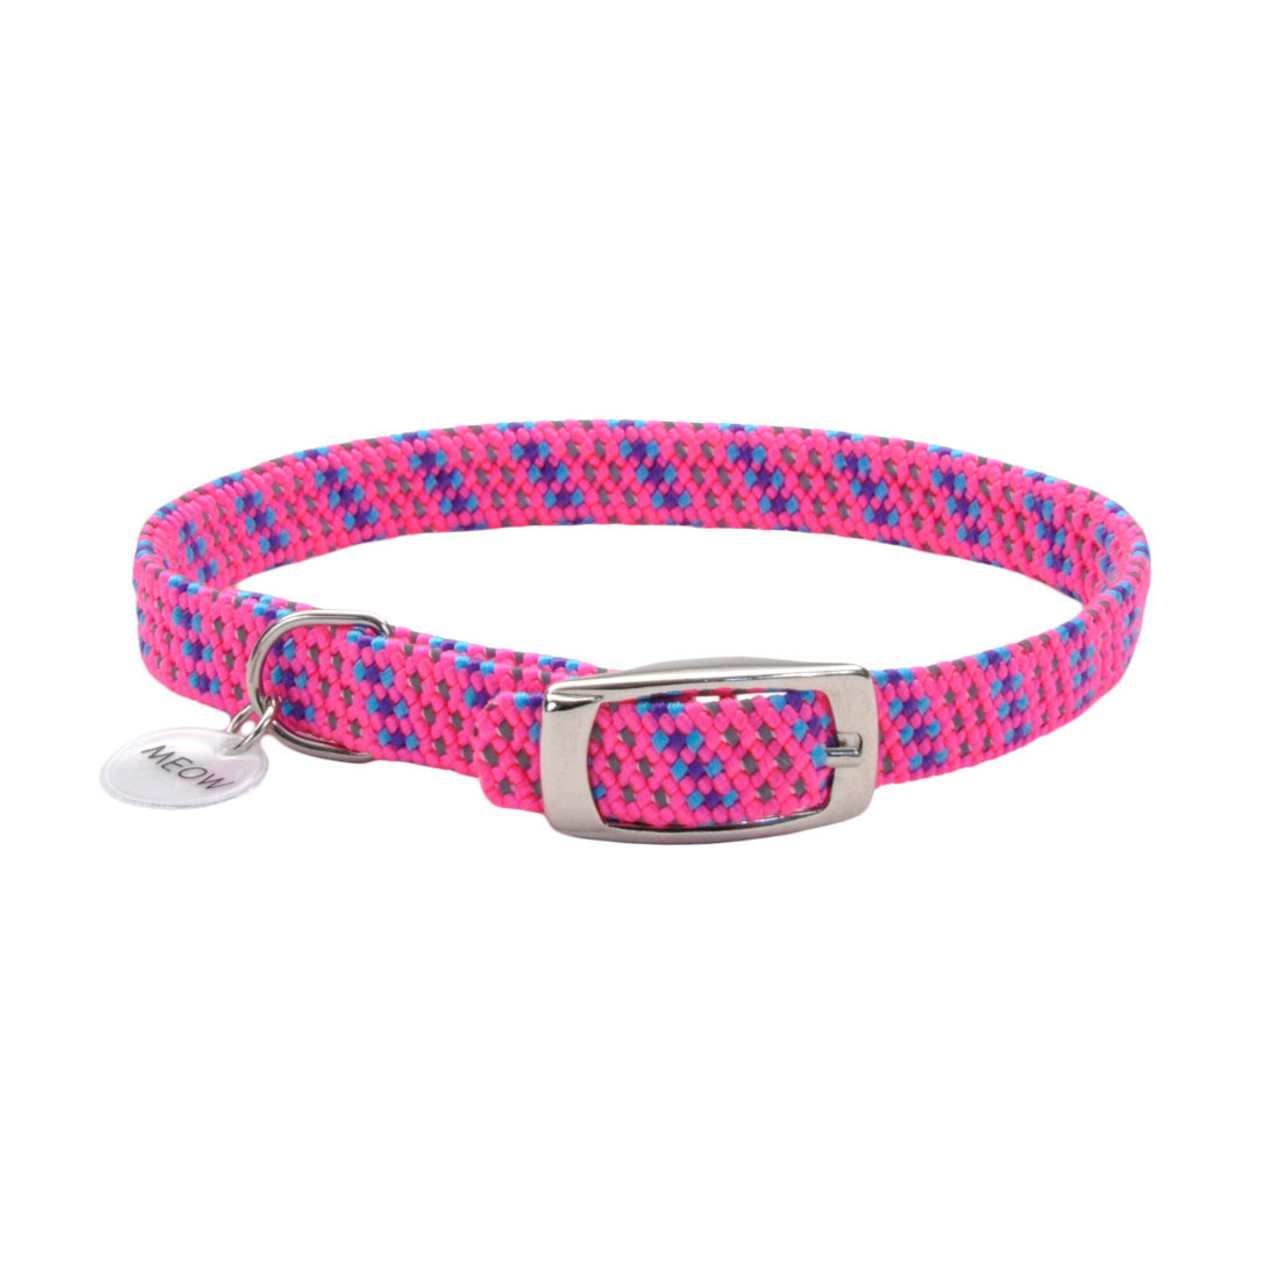 Coastal Pet Products Elastacat Safety Stretch Collar With Reflective Charm  - Feeders Pet Supply